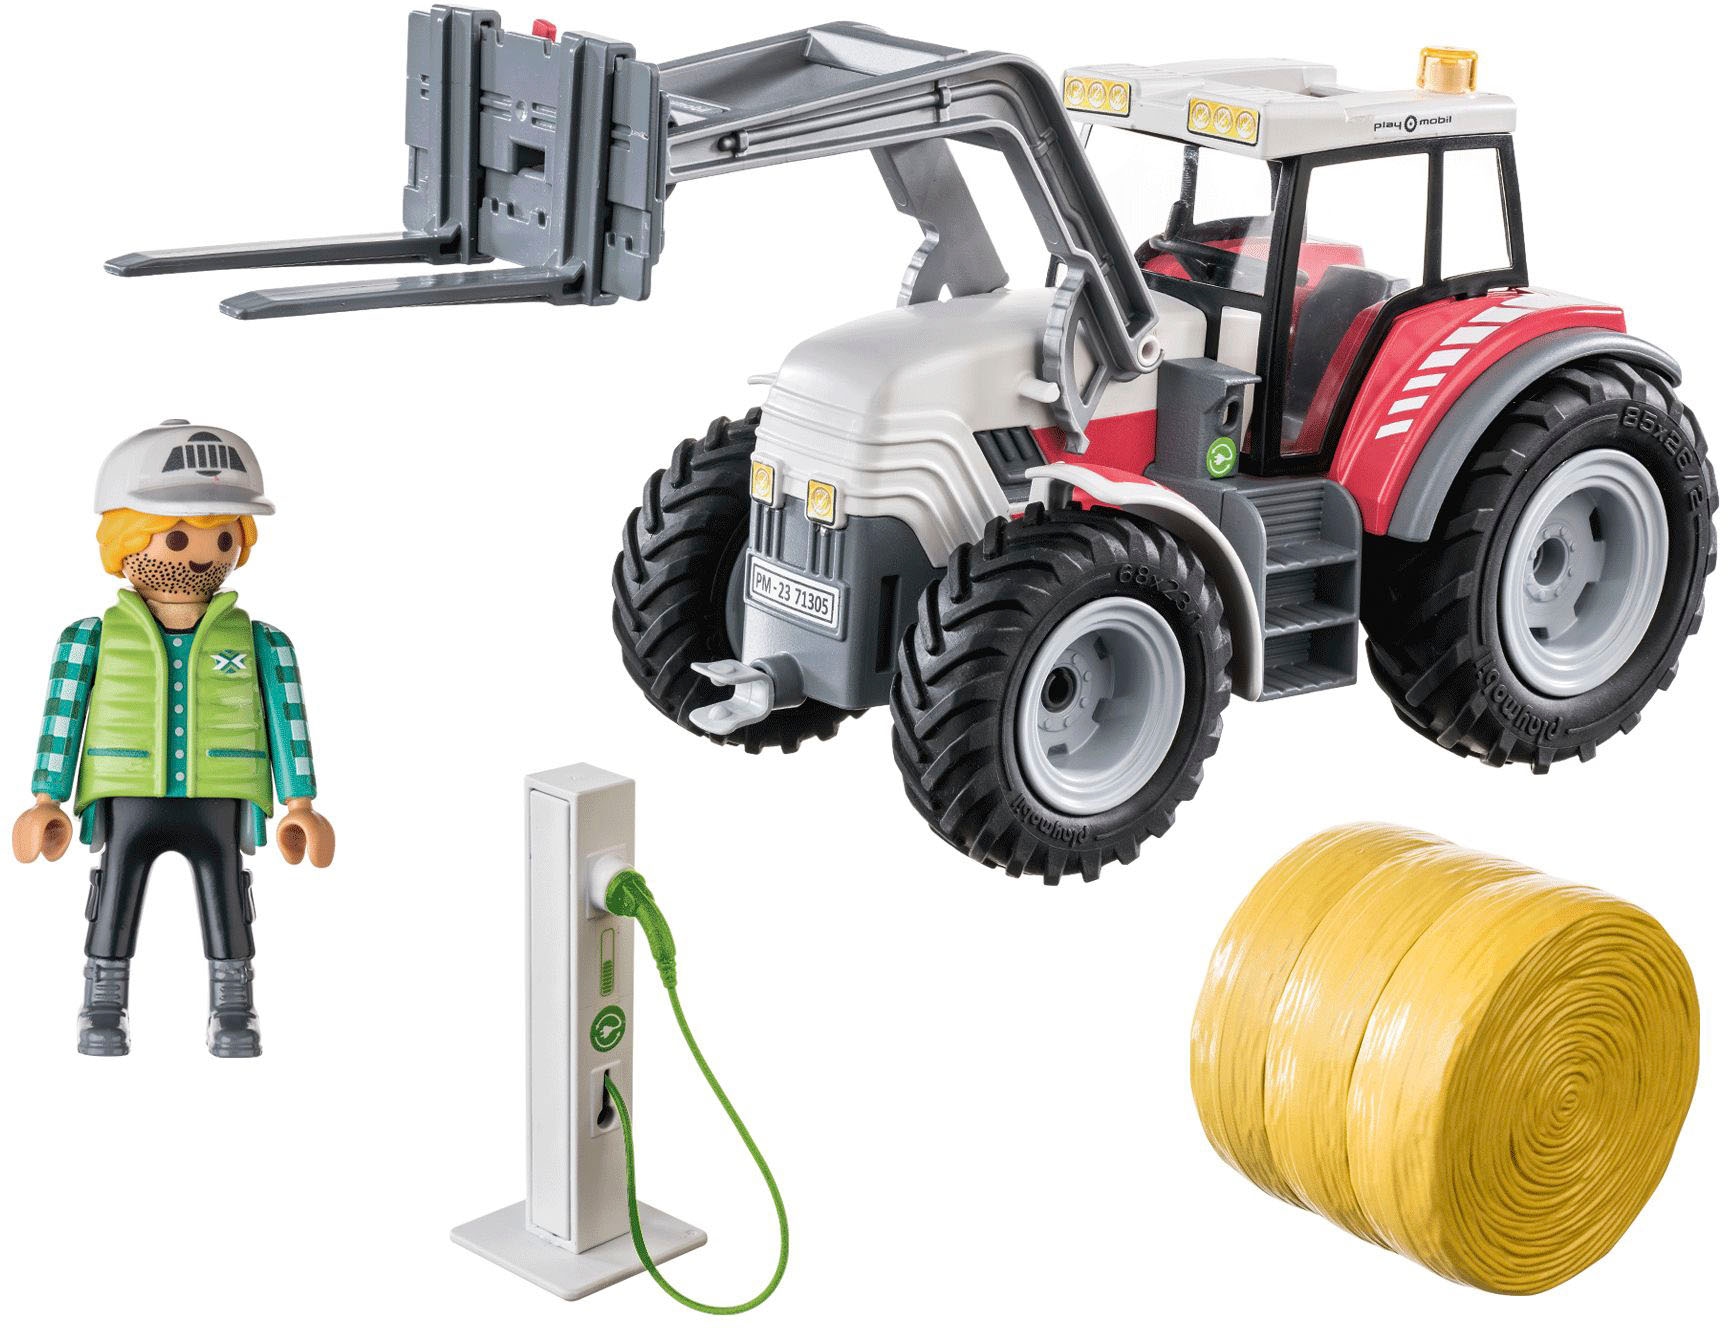 Playmobil® Konstruktions-Spielset »Großer Traktor (71305), Country«, (31 St.), teilweise aus recyceltem Material; Made in Germany